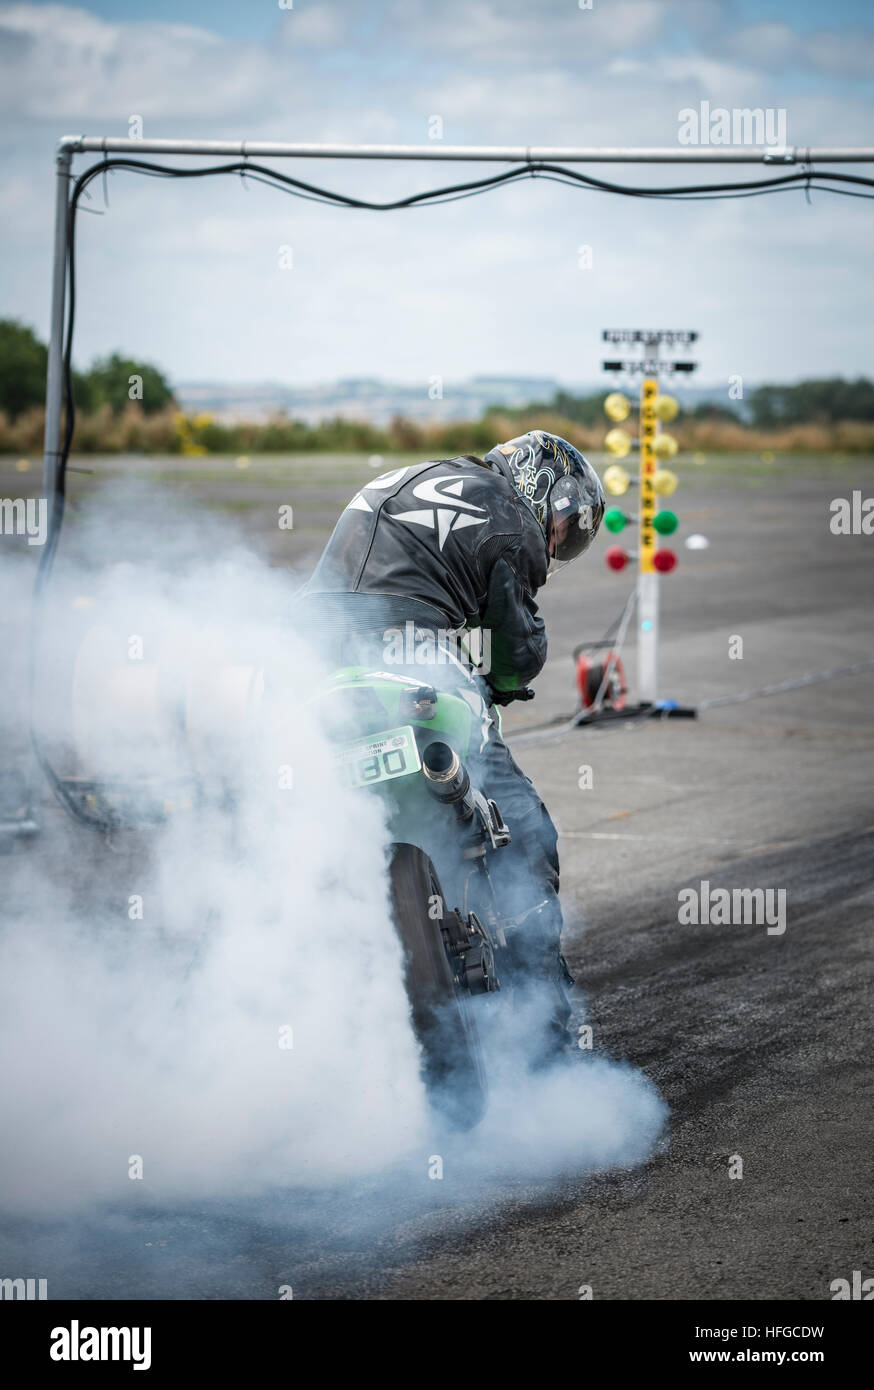 A motorcycle rider performs a burnout, to warm up the tire, before a drag racing event. Stock Photo